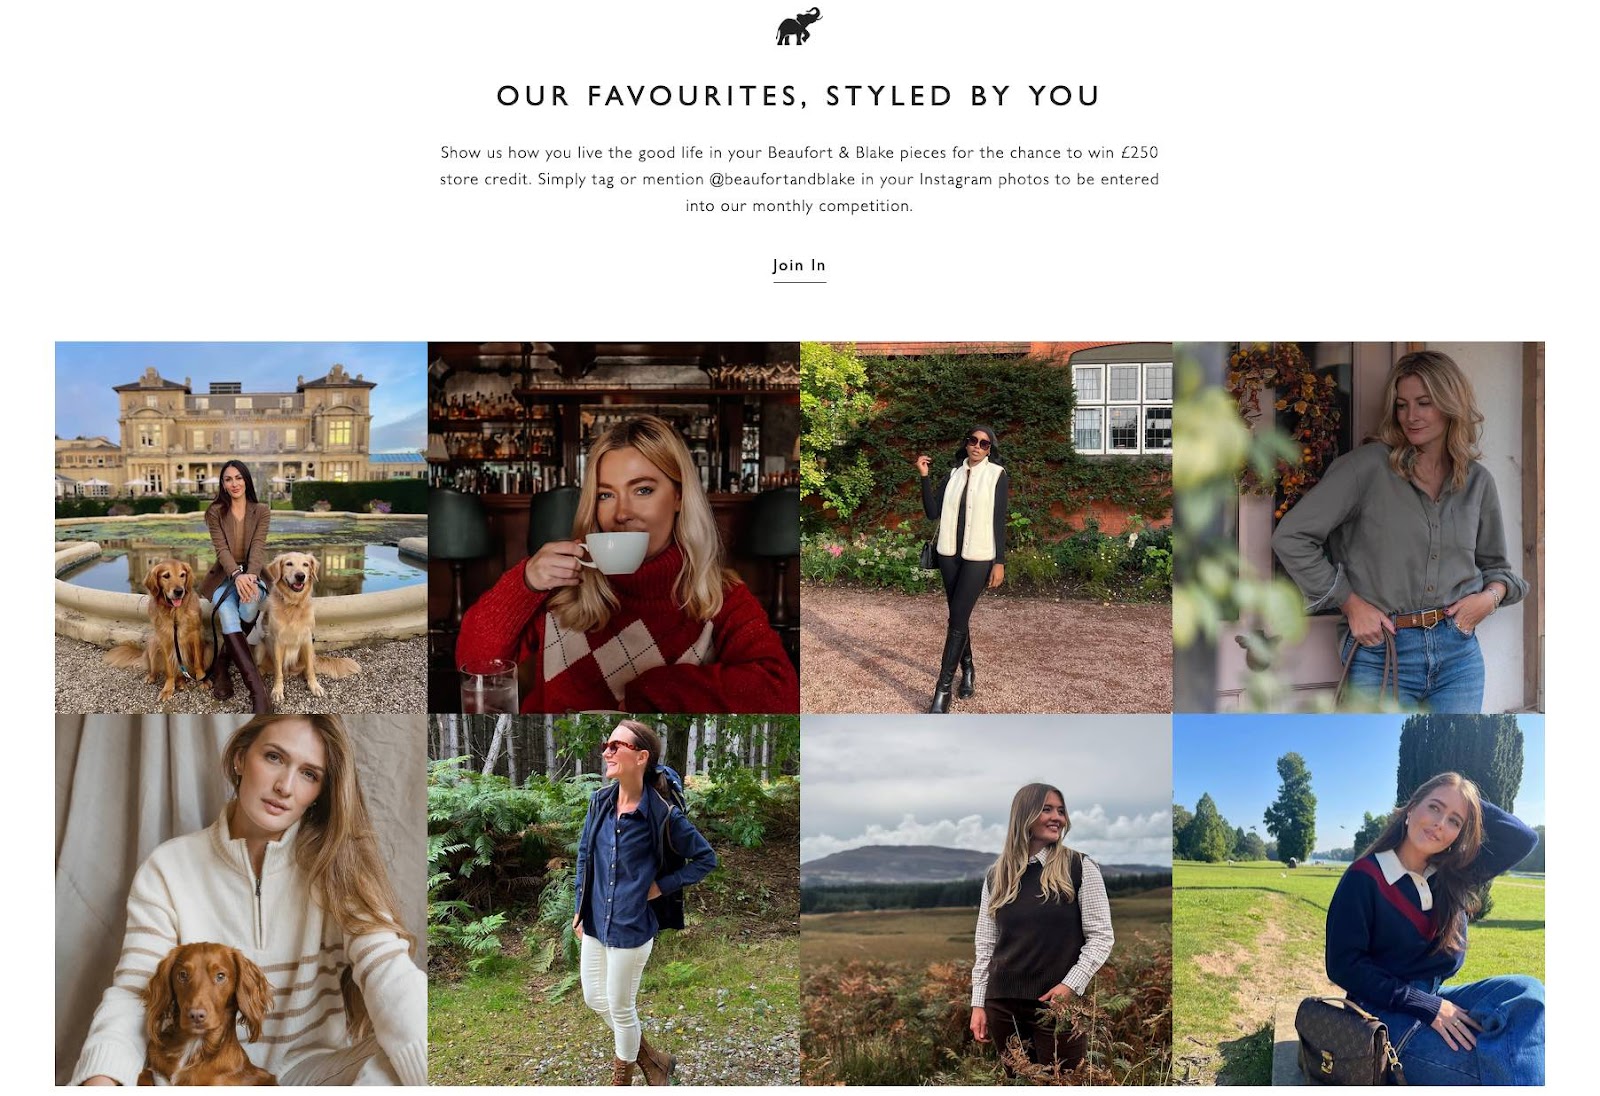 Beaufort & Blake's “Our favourites, styled by you” section of the website